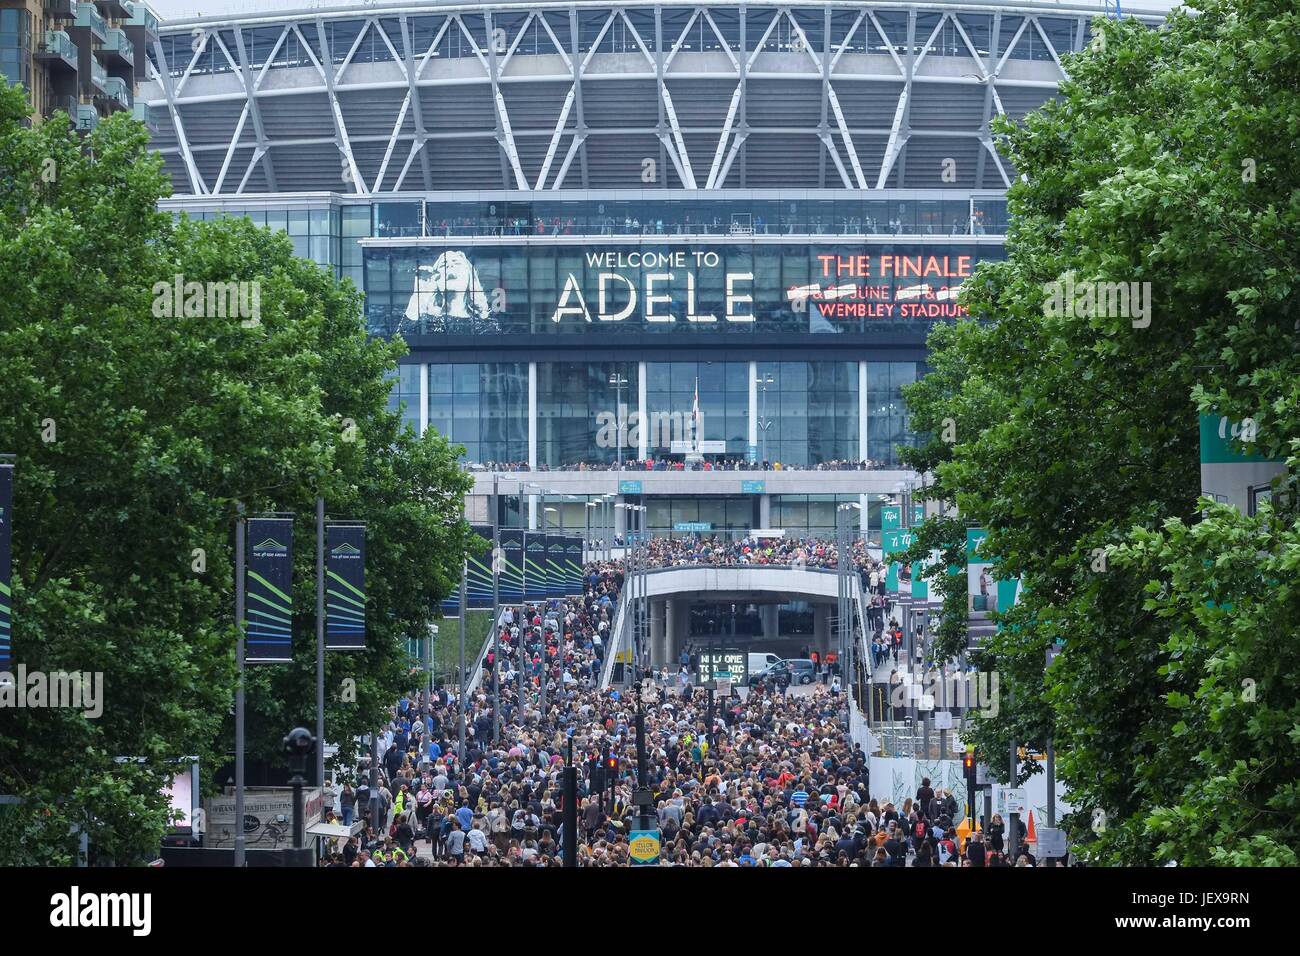 London, UK. 28th June 2017. Adele ends her world tour called The Finale  with four shows at Wembley Stadium. The concerts will be the biggest in the  stadiums history with 98,000 fans